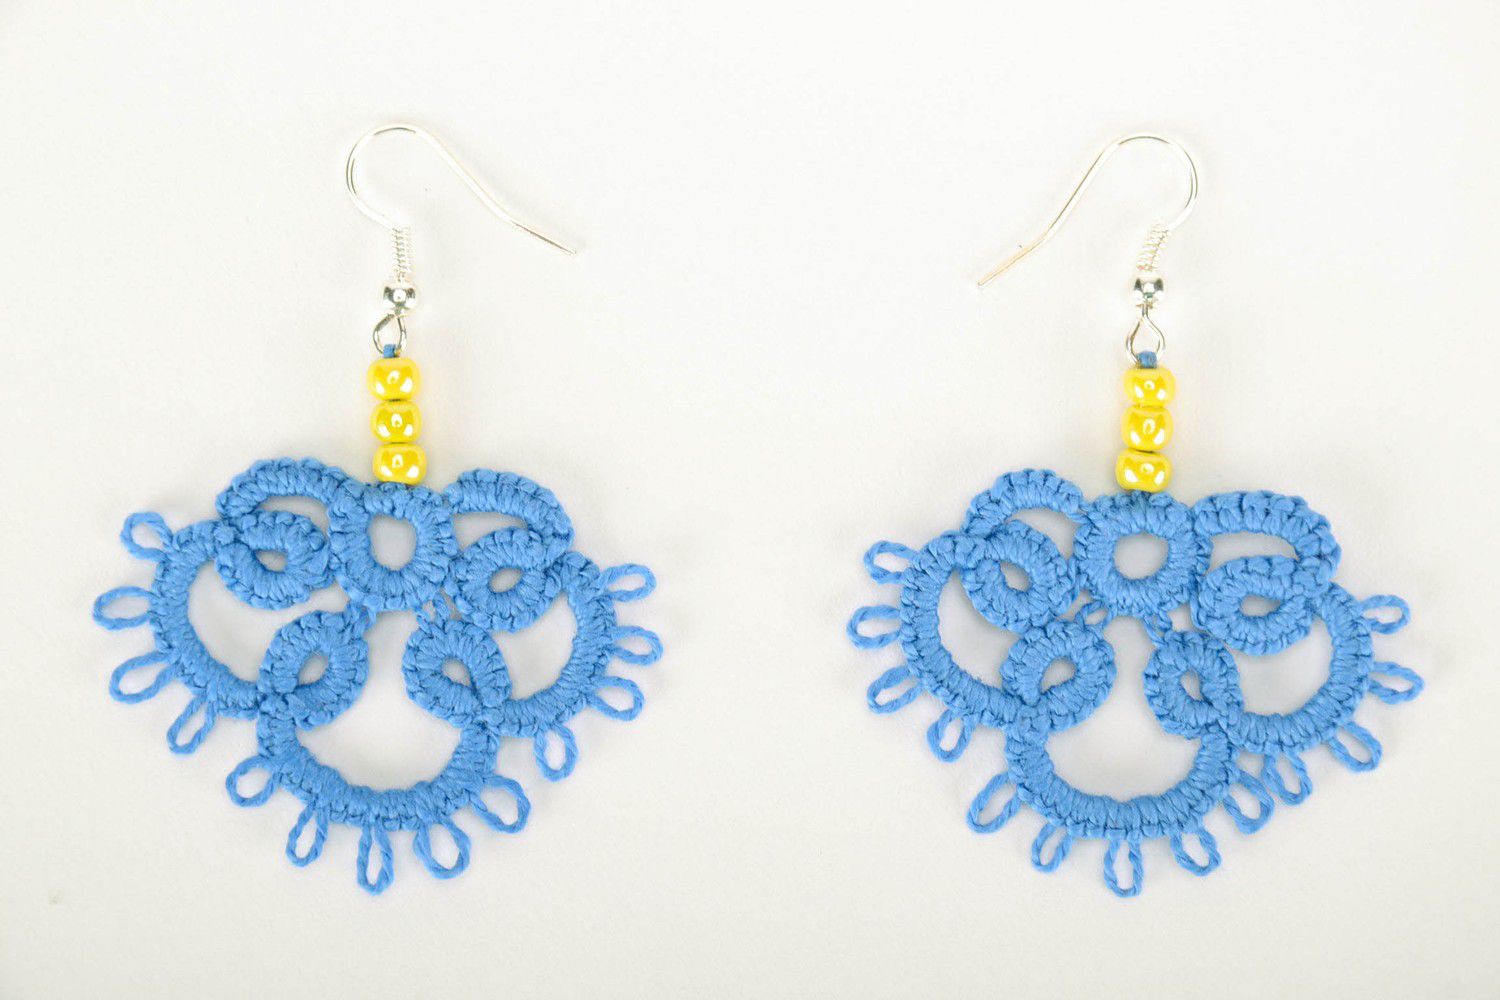 Handmade lace earrings made using tatting technique photo 3